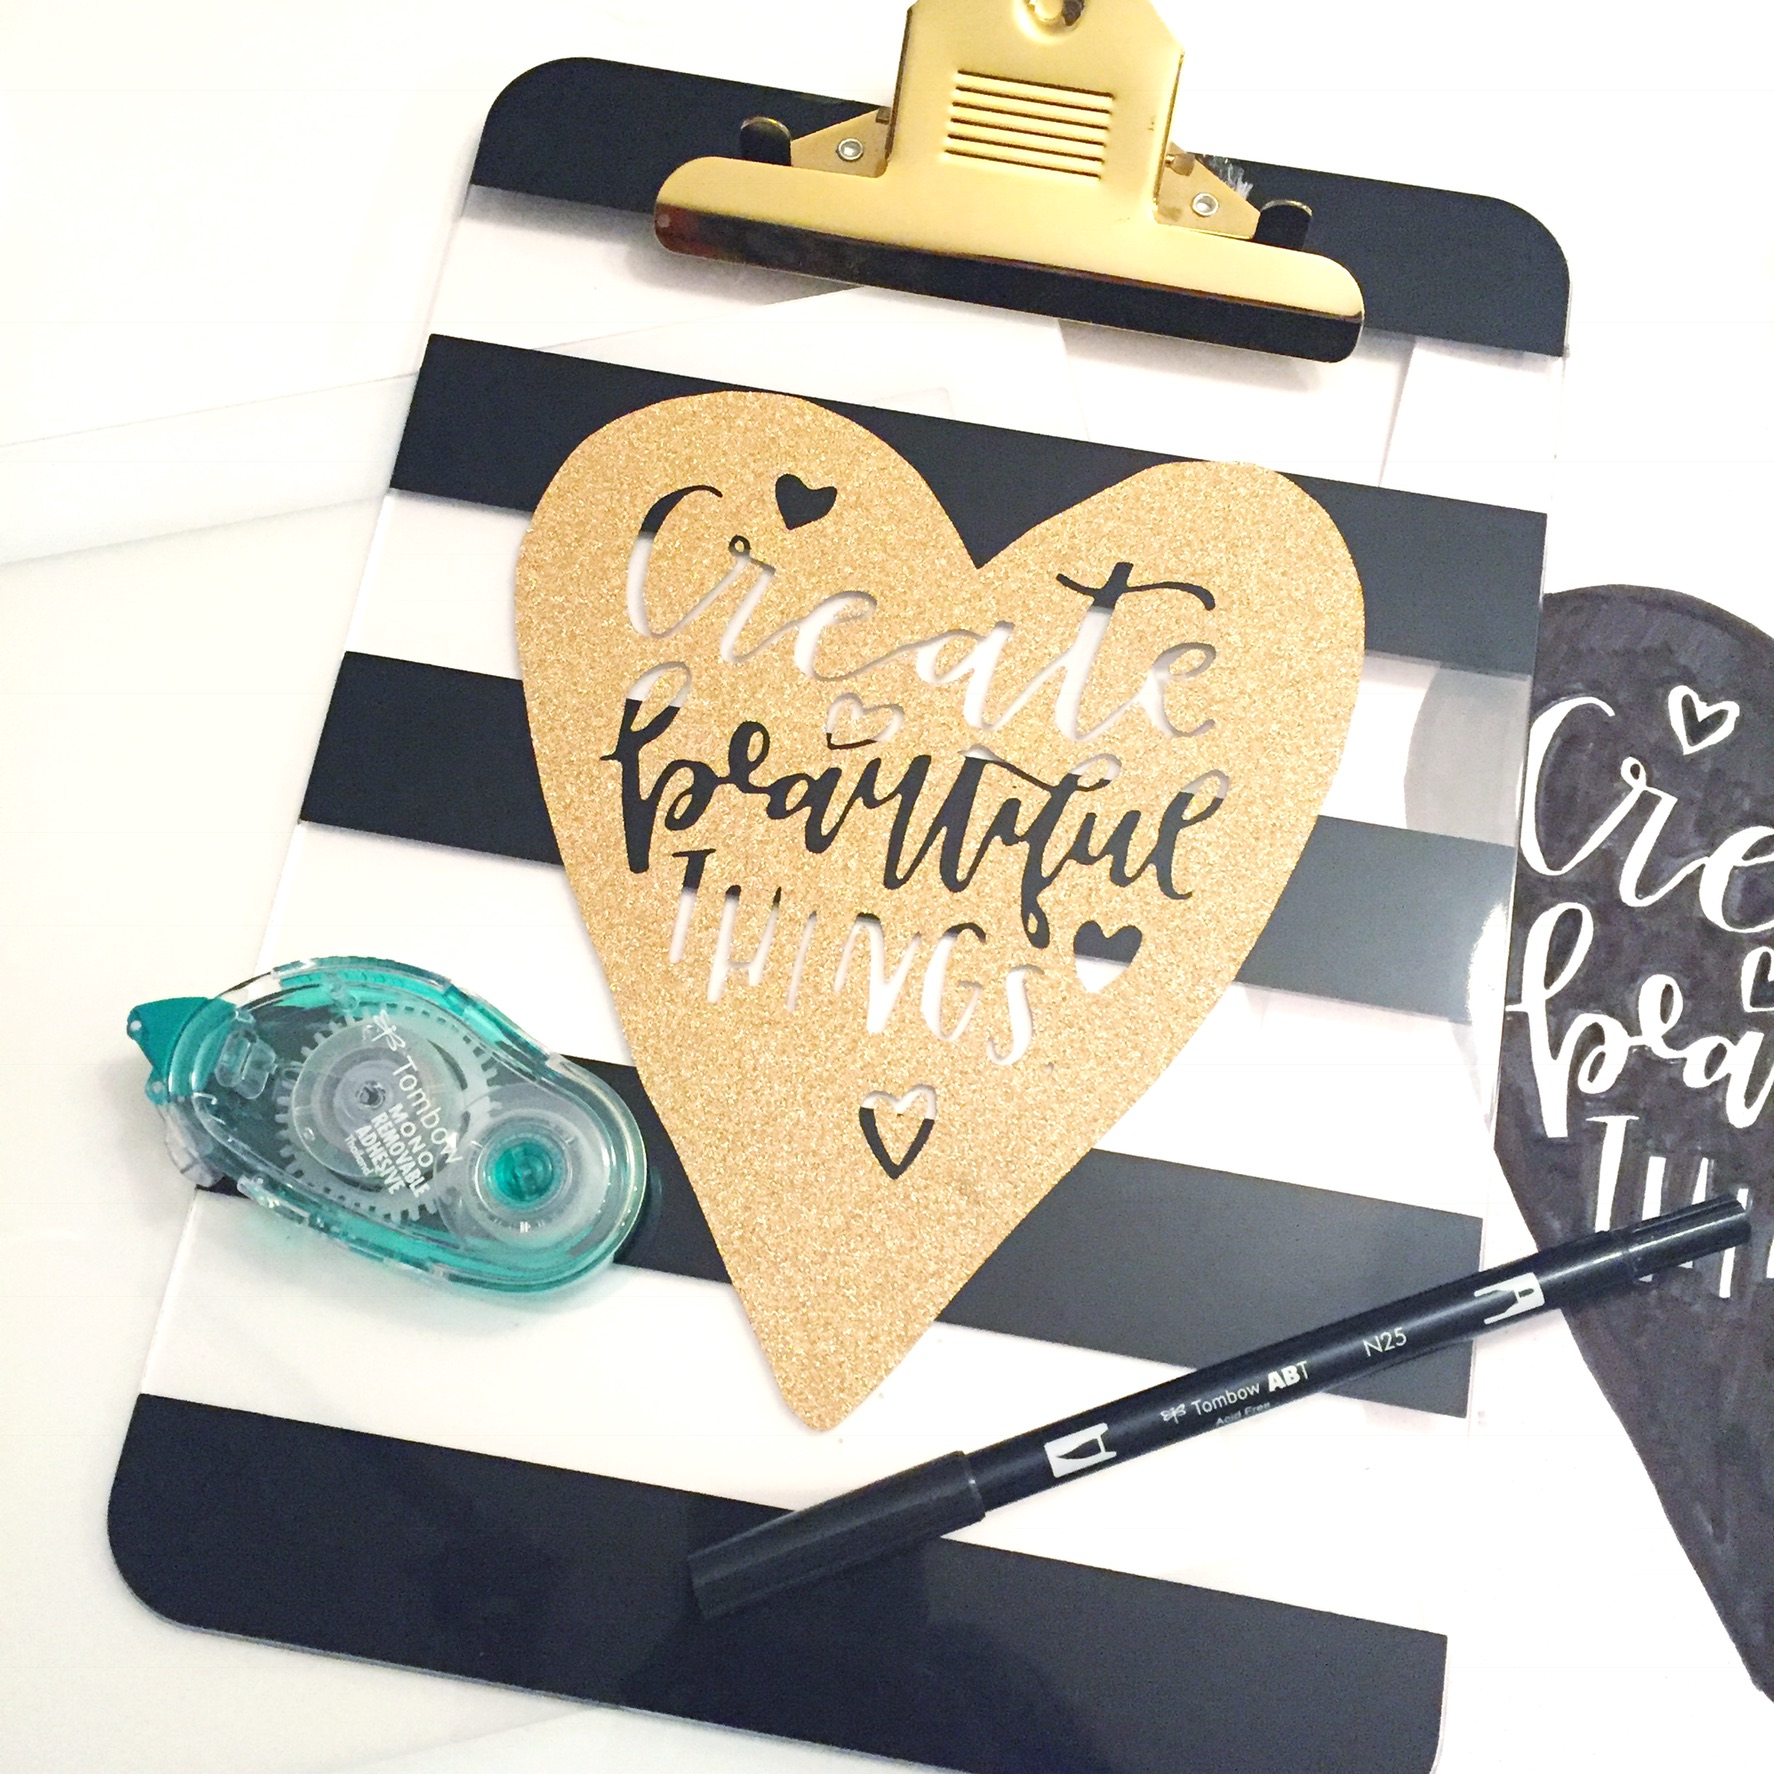 Lauren Fitzmaurice of @renmaecalligraphy takes you through 10 easy steps of transforming your own lettering into a fun and unique vinyl project using Cricut and Tombow USA products. For more lettering tips and tricks, follow Lauren on Instagram @renmadecalligraphy or on renmadecalligraphy.com.